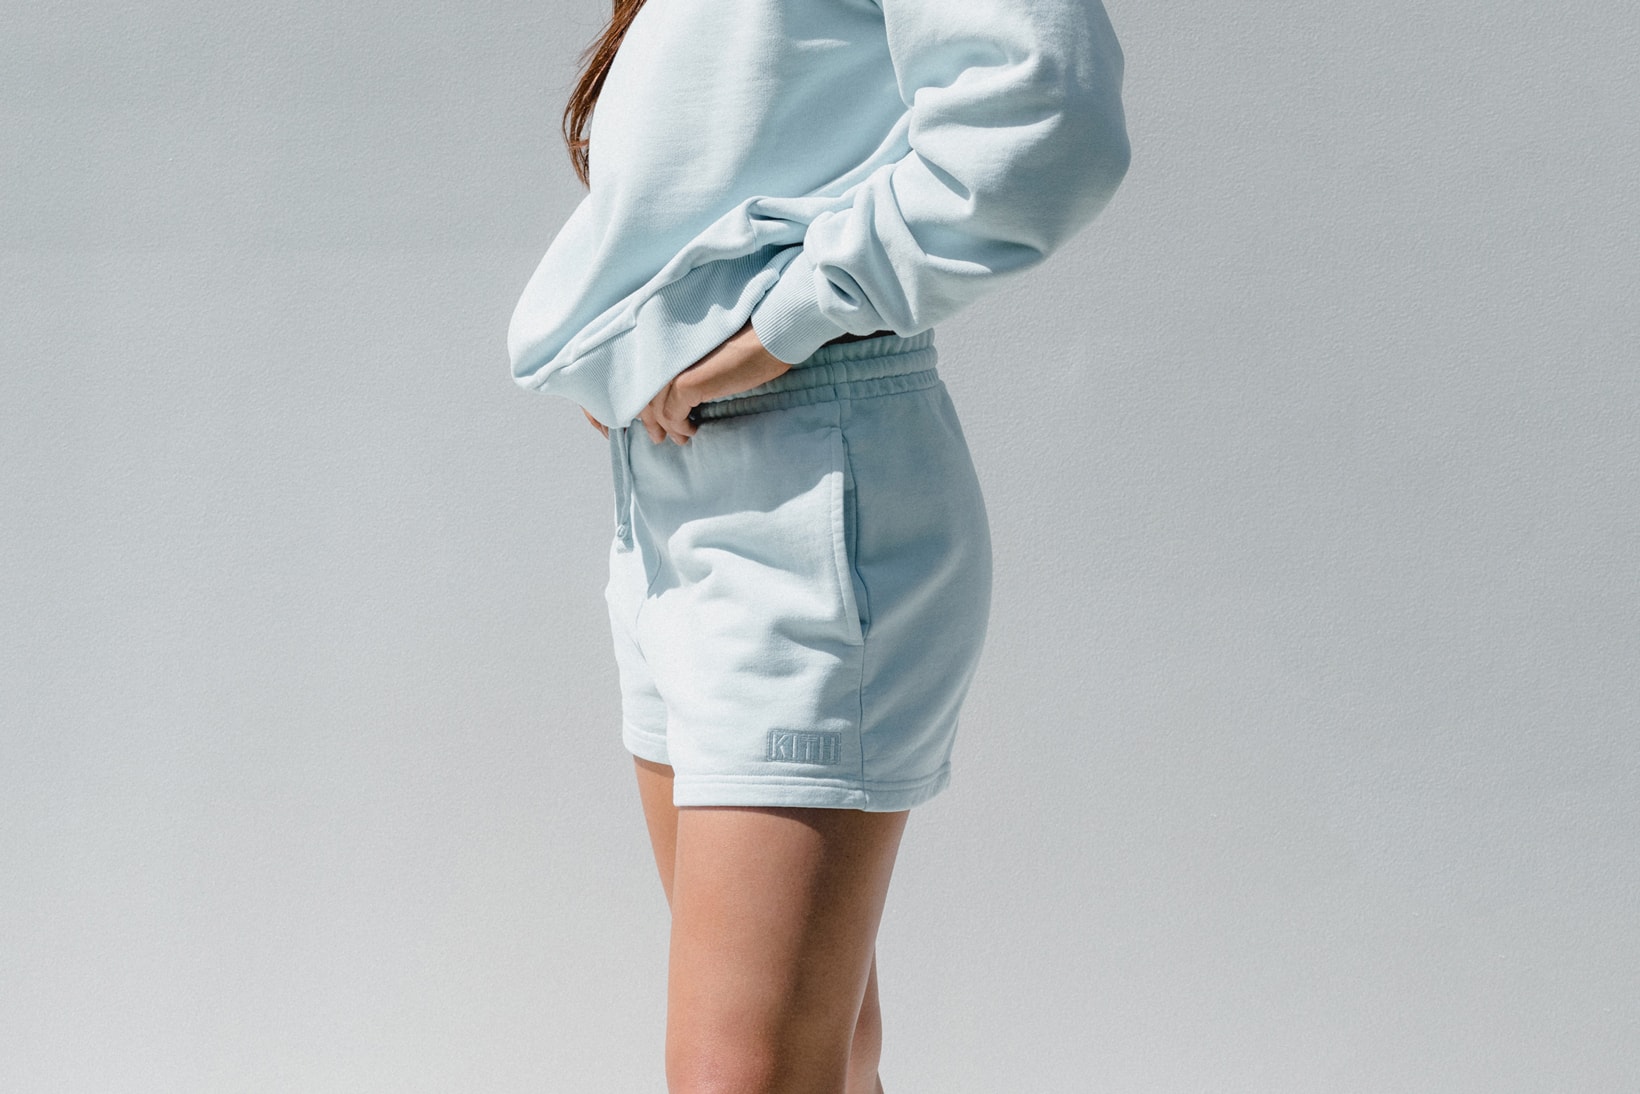 Kith Women Spring 2018 Classics Collection Crosby Crew Elizabeth Shorts Baby Blue